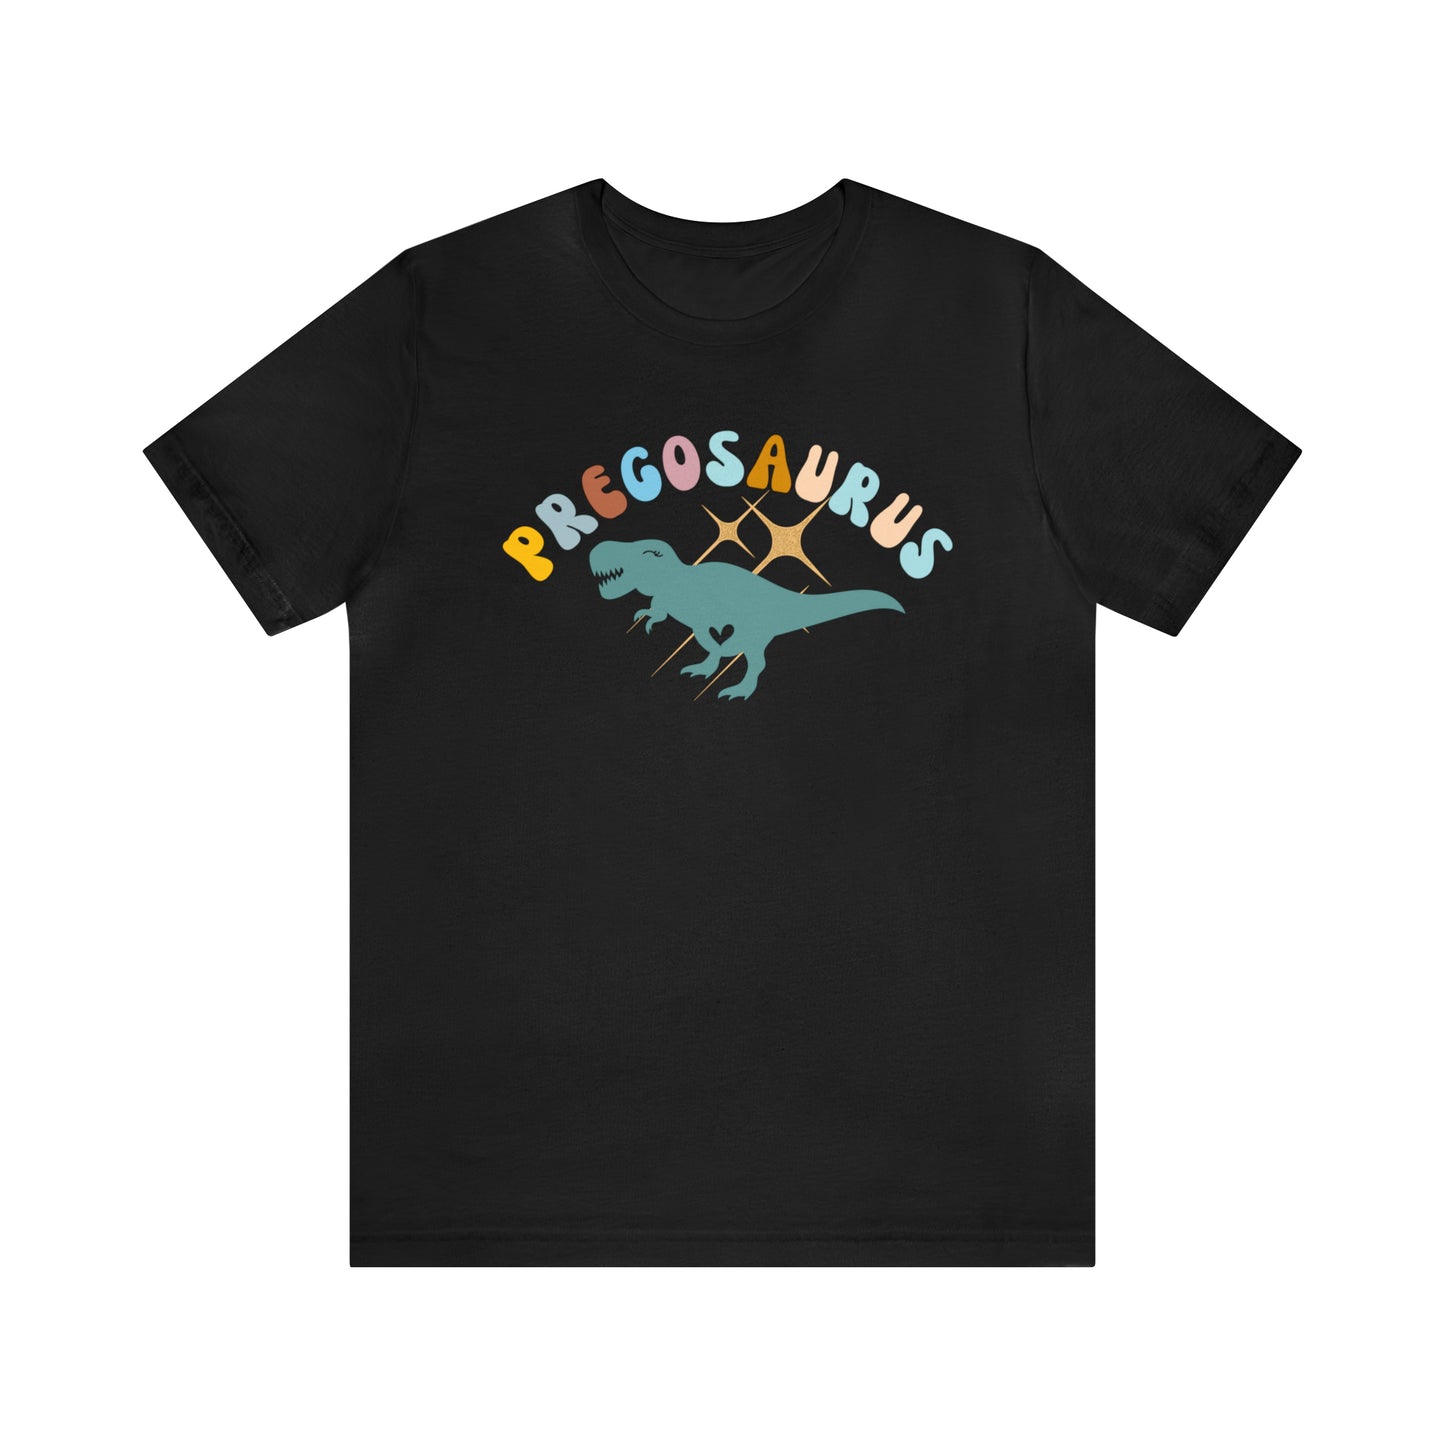 Funny Pregosaurus TShirt for Baby Shower, Funny Gift for Expecting Mom Shirt for Baby Announcement, T274